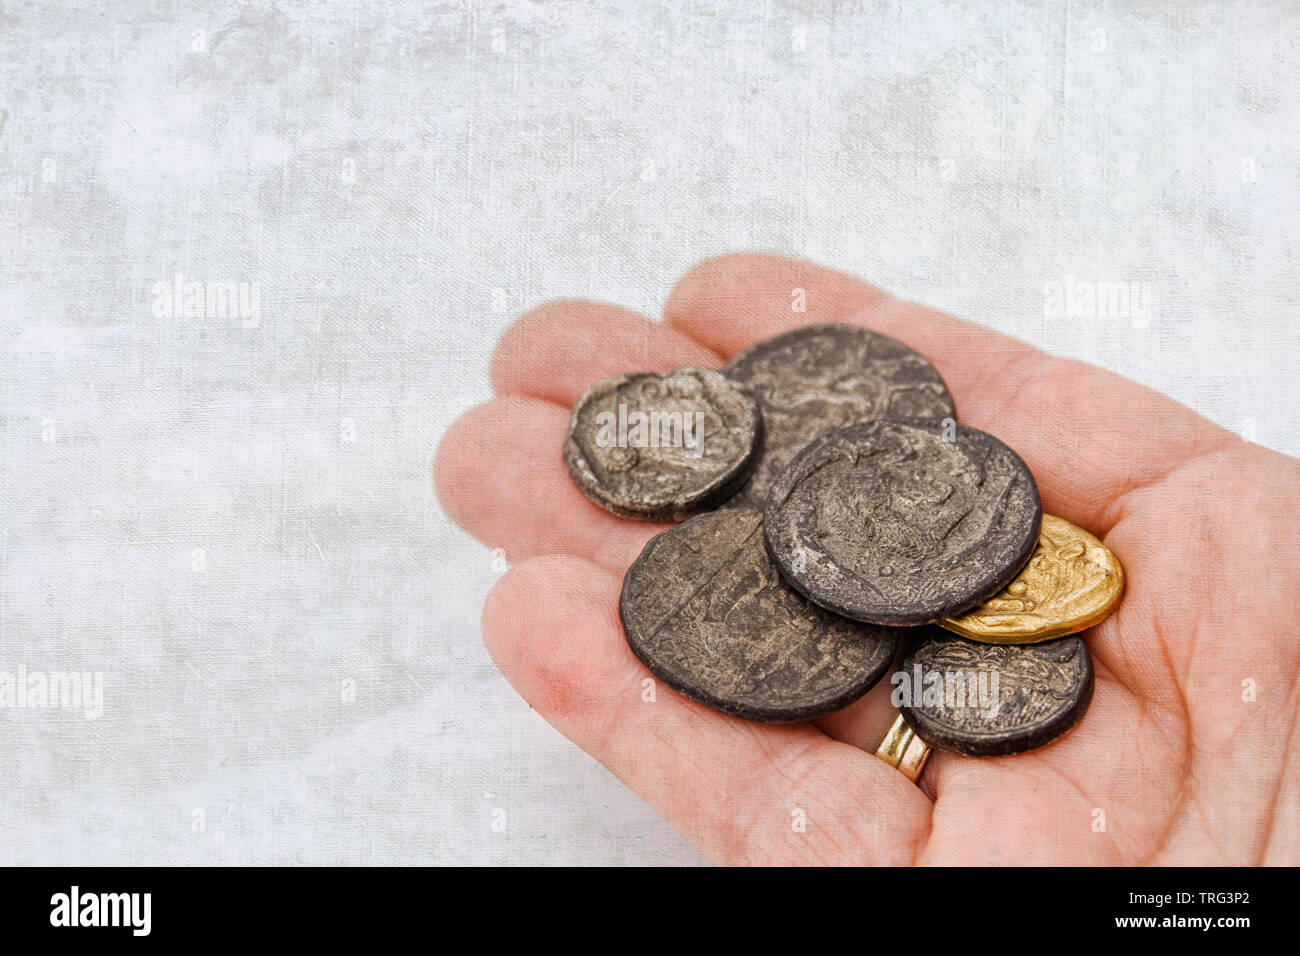 Hand with a collection of old roman coins Stock Photo